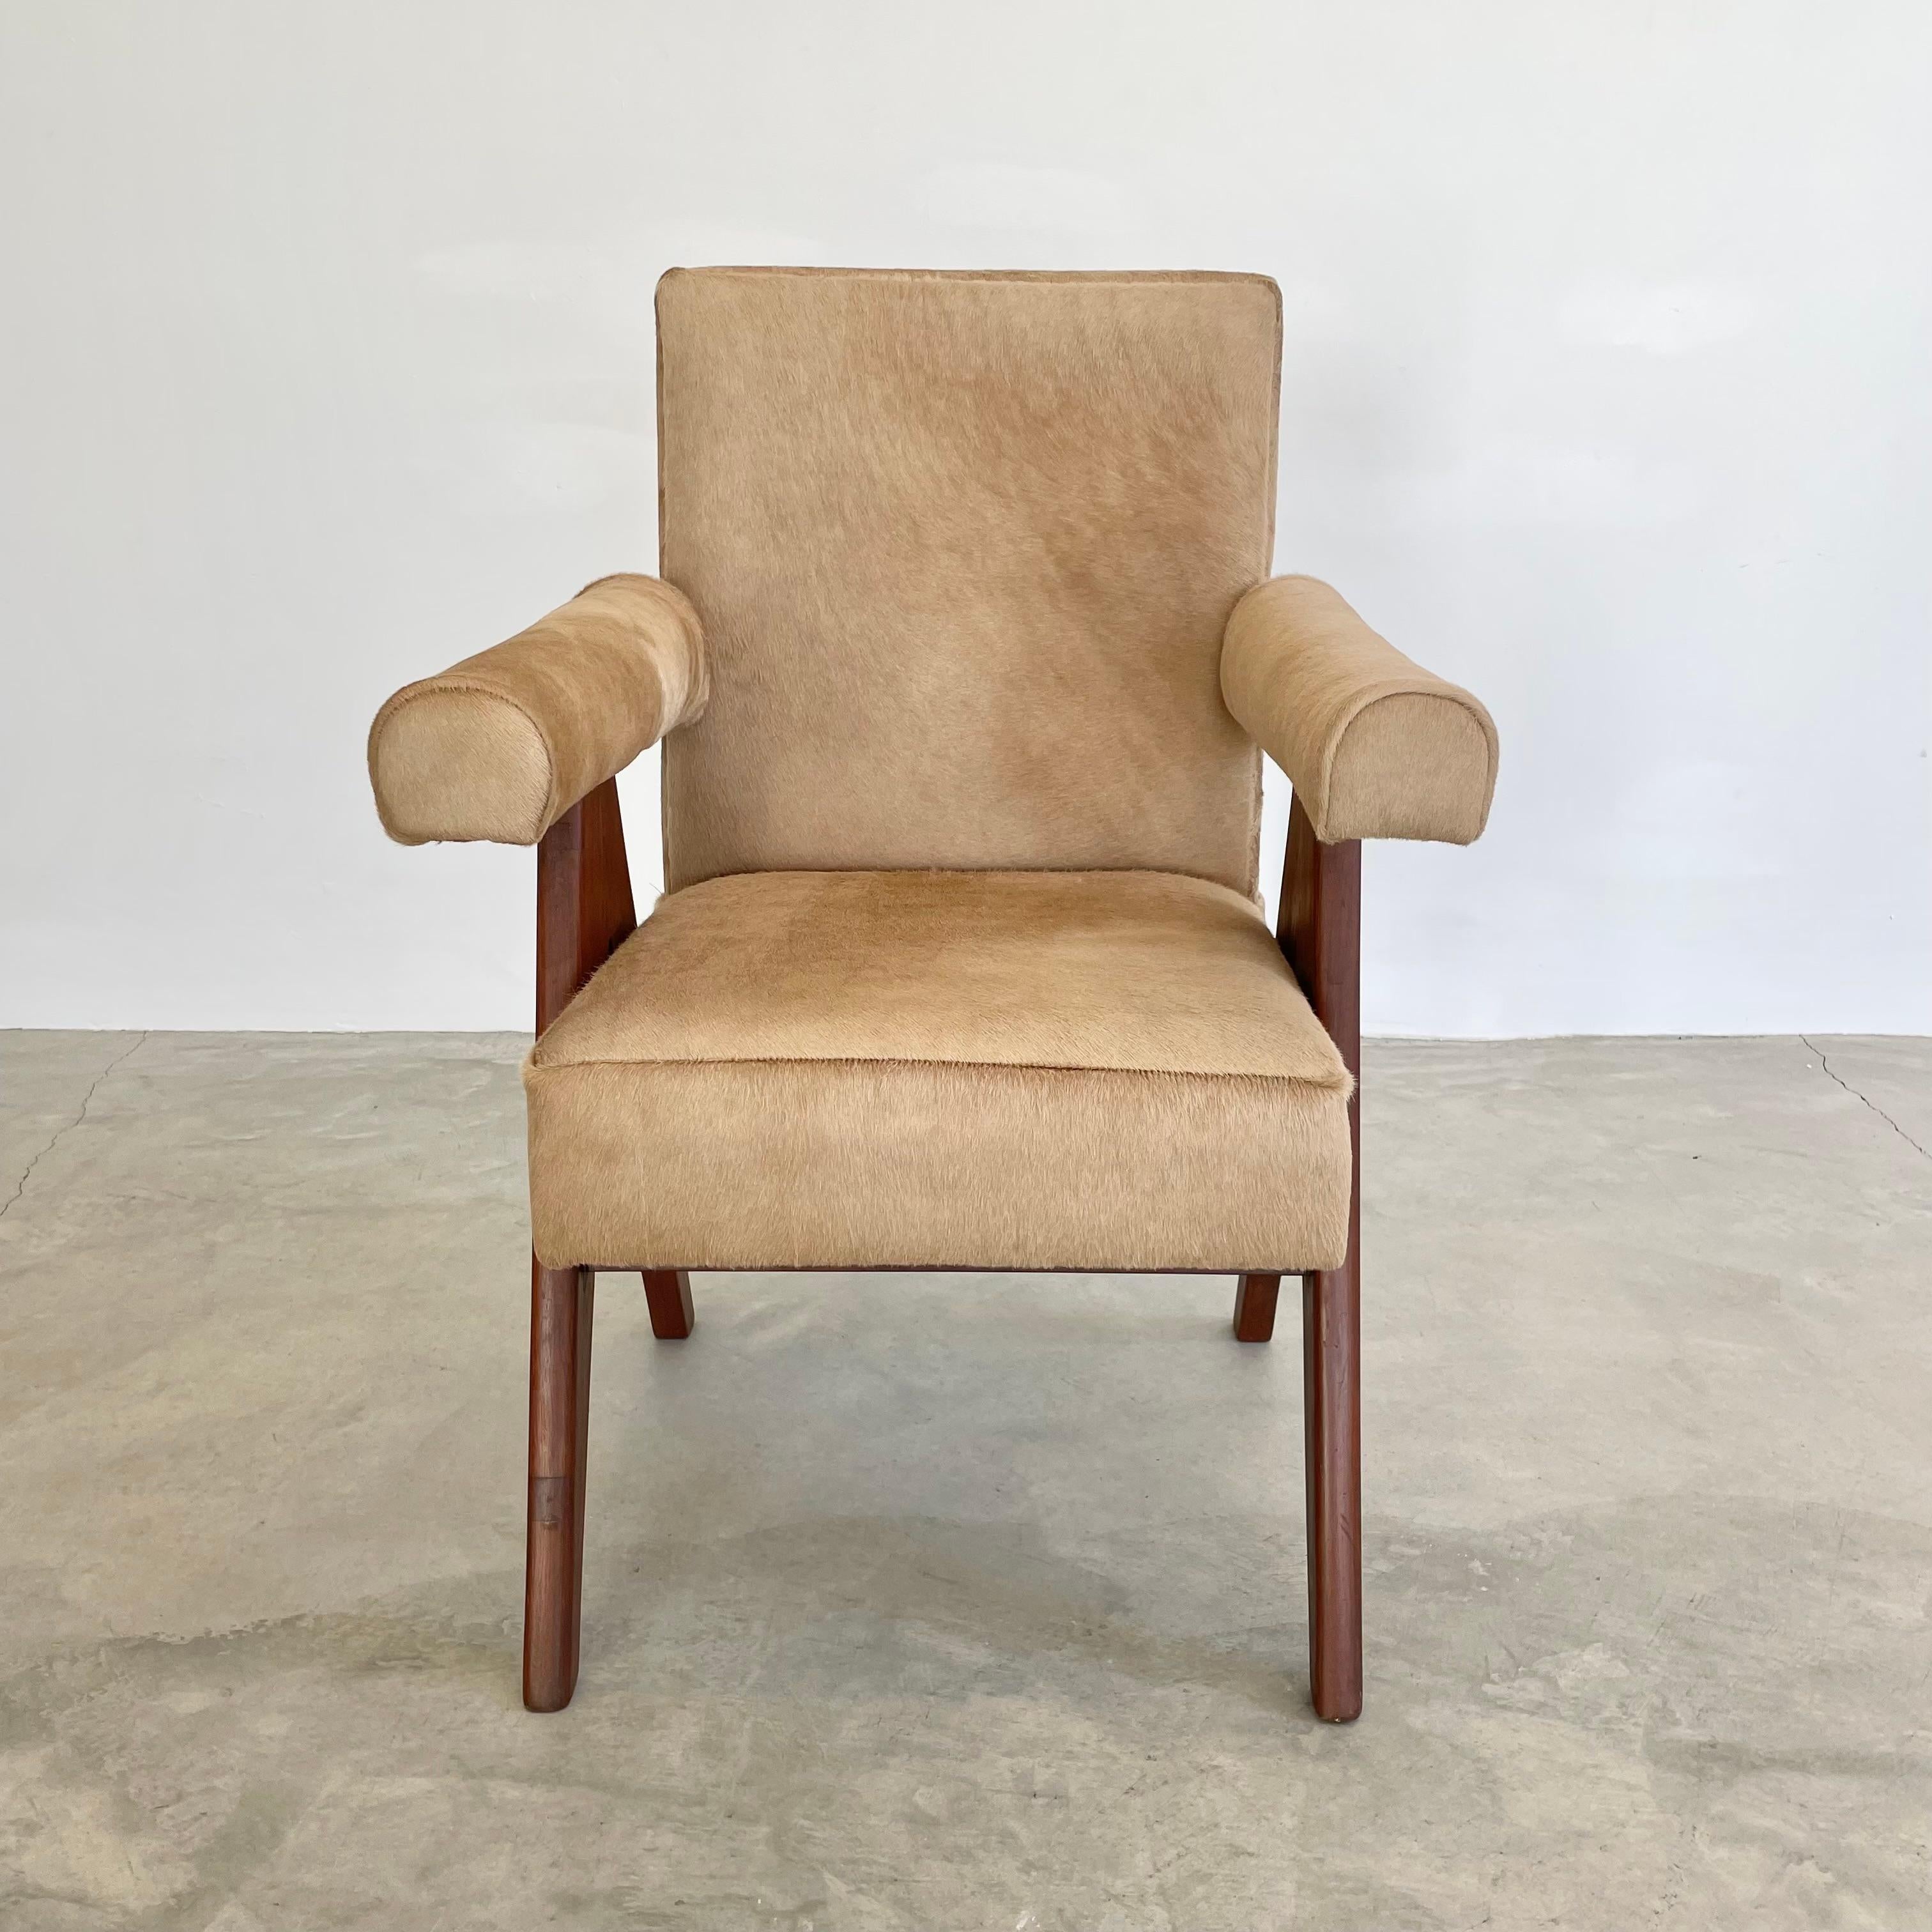 Stunning teak Senate chair fully reupholstered in a cappuccino cowhide designed by Pierre Jeanneret for Chandigargh. Plush seat resting on two 